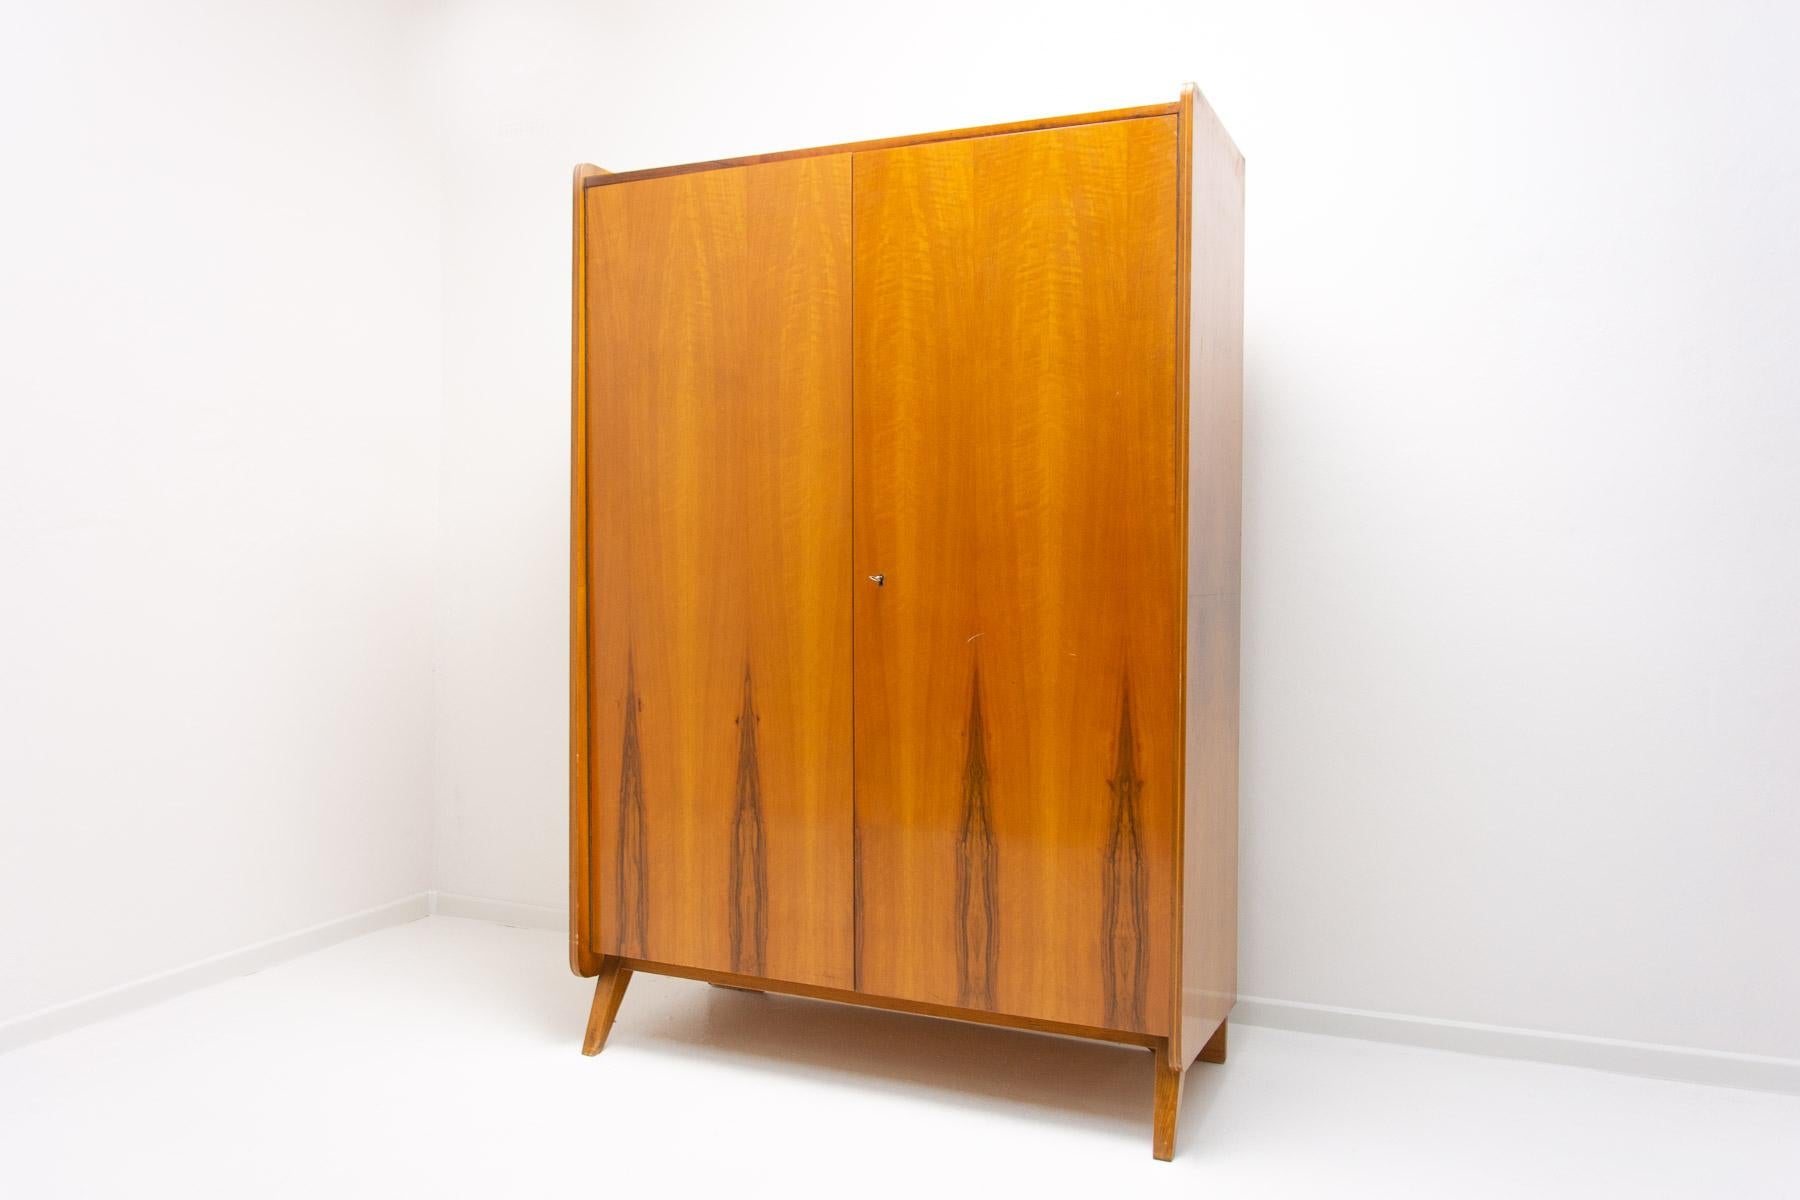 Vintage Czechoslovak modernist wardrobe designed by Frantisek Jirak for Tatra nabytok. Made in Czechoslovakia during the 1960s. It is made of beechwood and plywood. This item is in good vintage condition without visible damage, showing slight signs